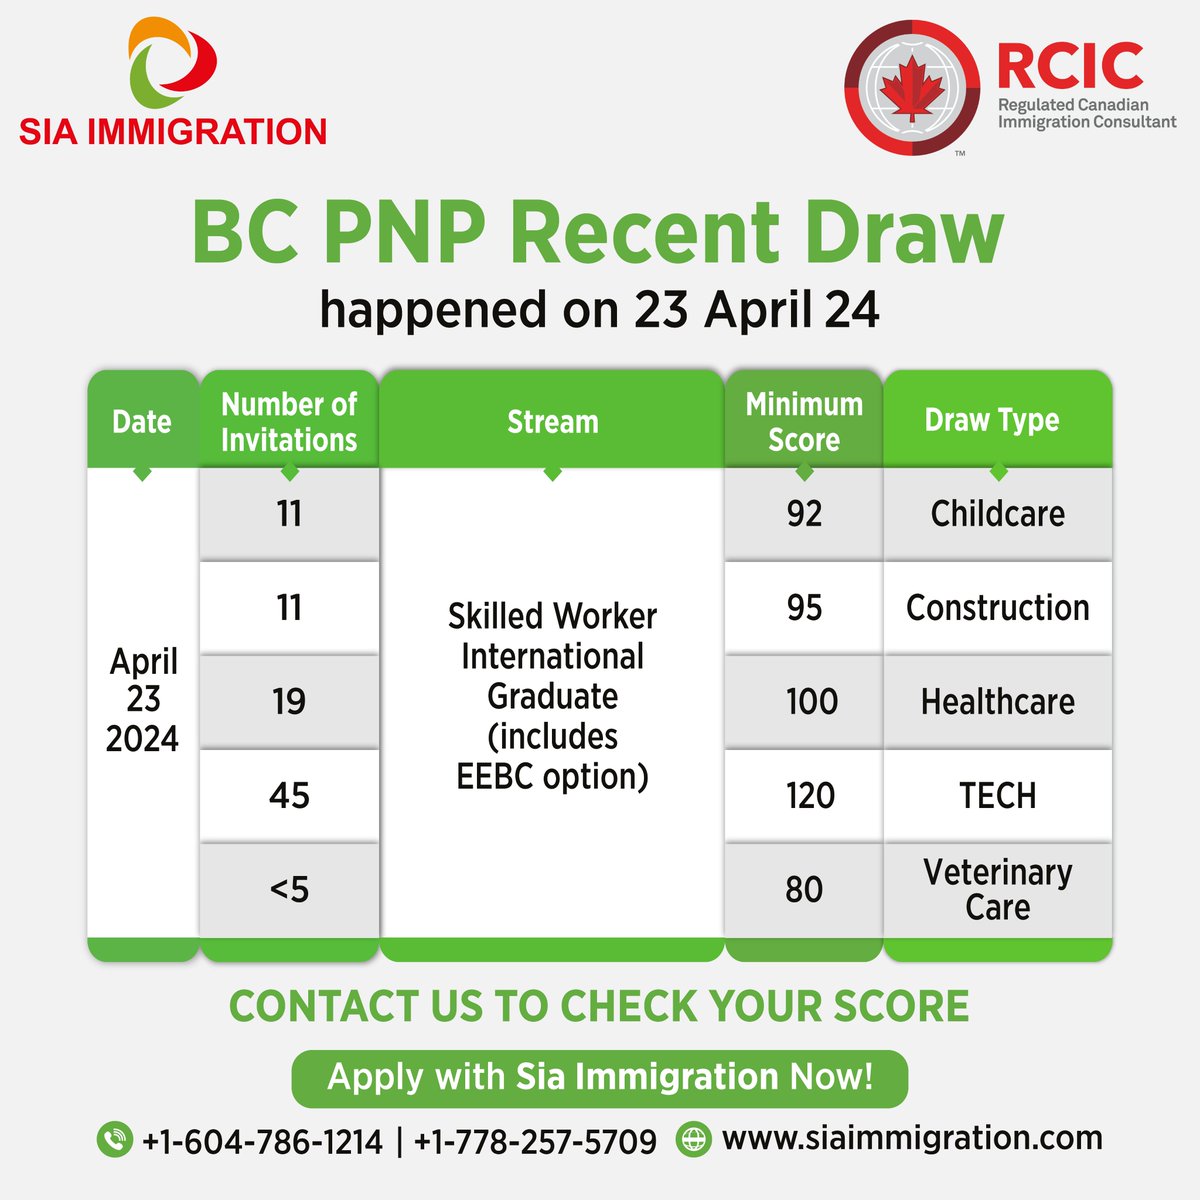 The BC PNP recent draw happened on 23 April 2024.

Apply with Sia Immigration Now @ +1-604-786-1214, +1-778-257-5709

visit: siaimmigration.com
#BCPNP #bcpnpDraw #PNPDraw2024 #23april #LatestDrawPNP #BritishColumbia #ProvinceNomineeProgram #SkilledImmigration #SkilledWorkers